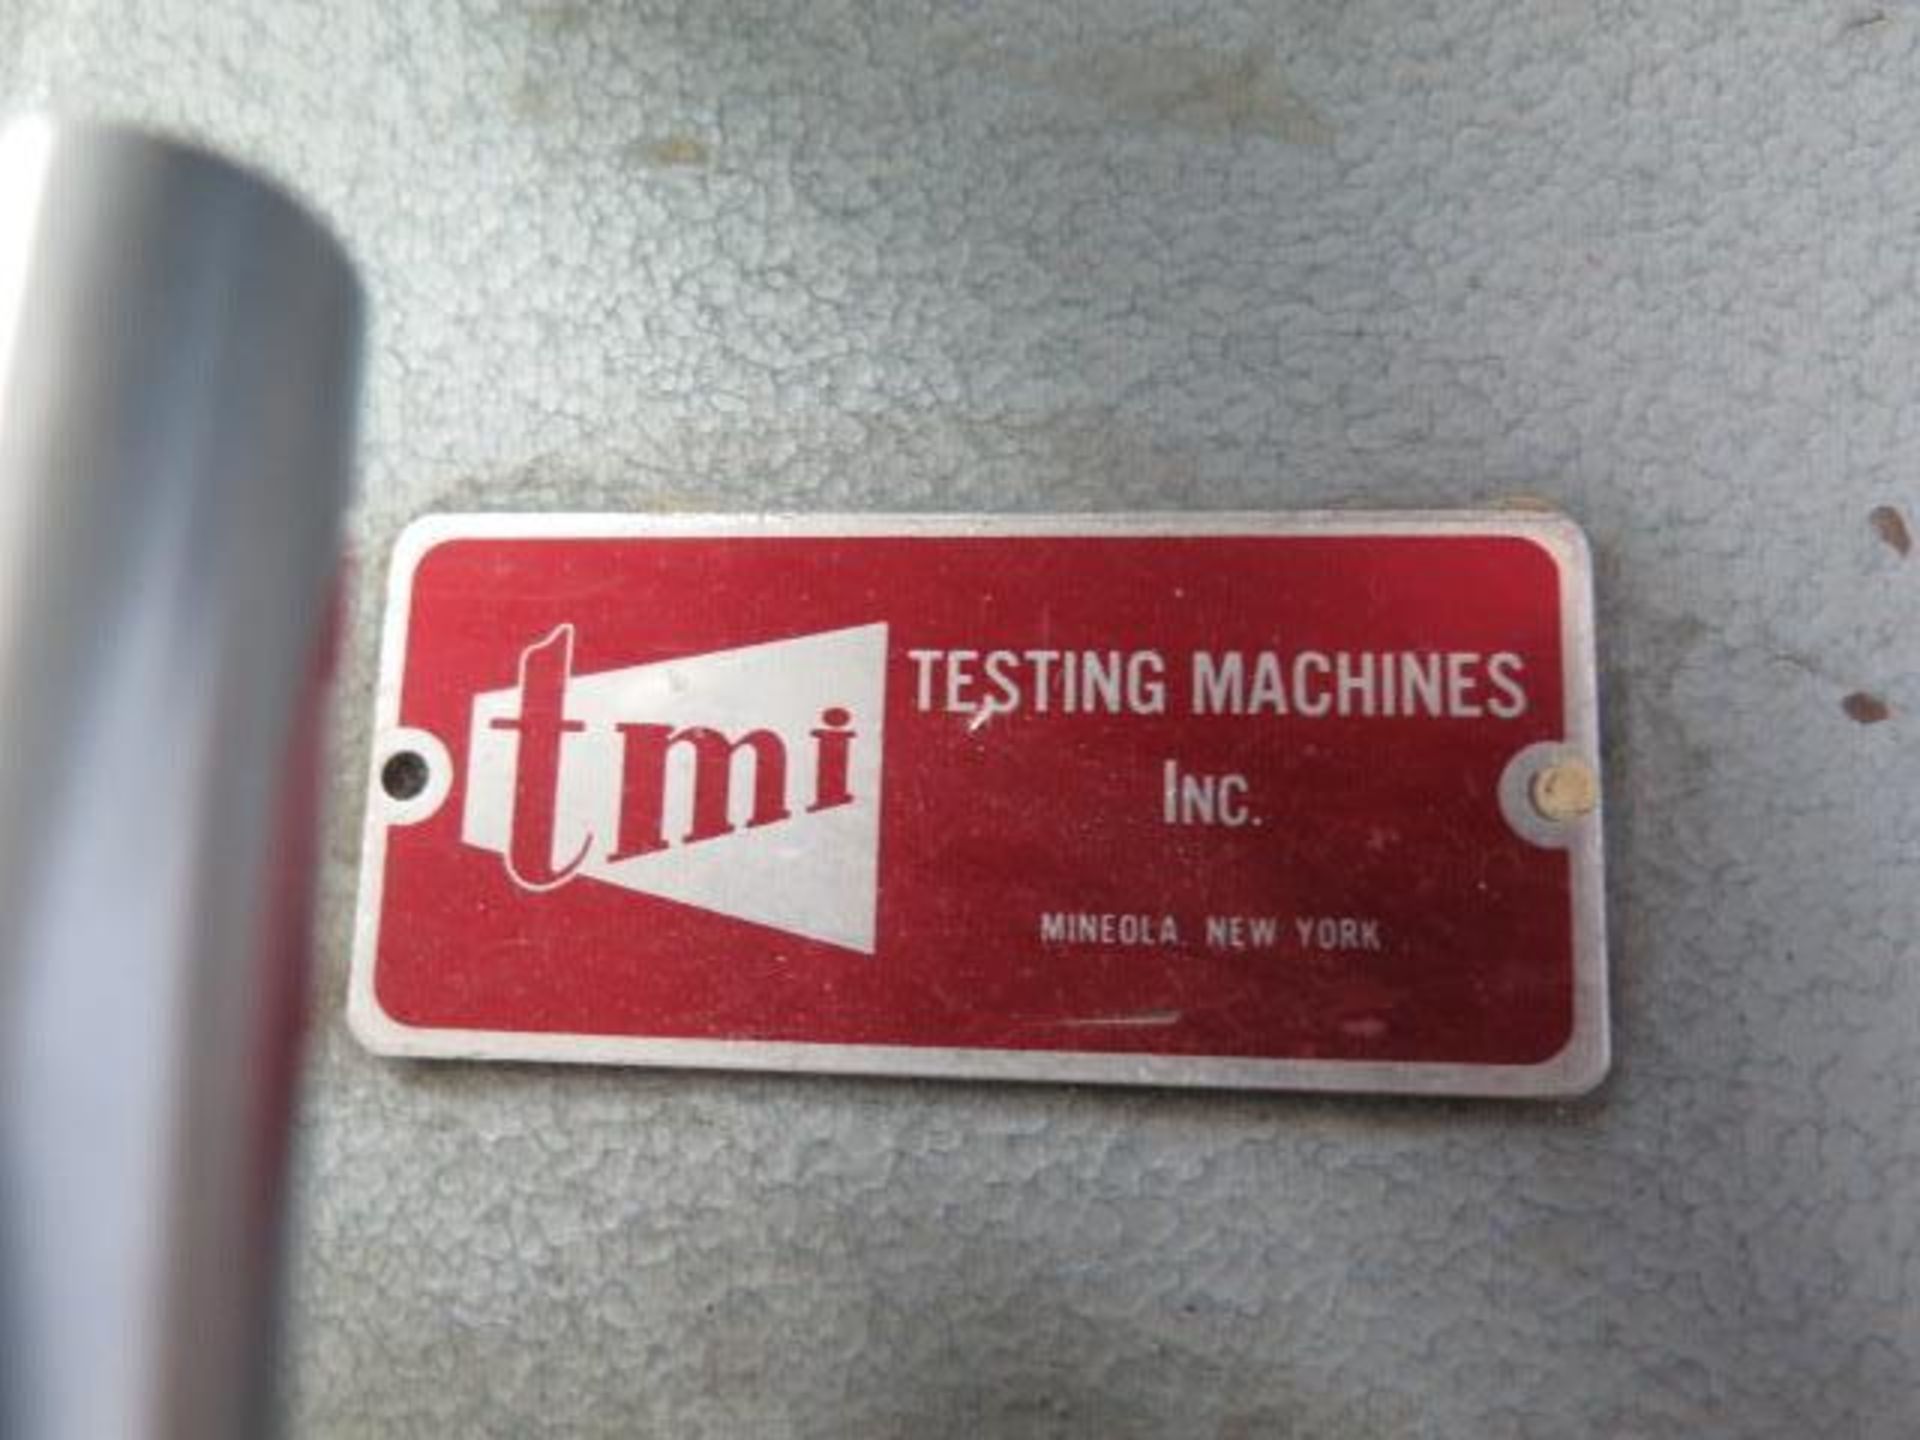 TMI Hardness Tester s/n 105876 w/ Accessories (SOLD AS-IS - NO WARRANTY) - Image 9 of 9